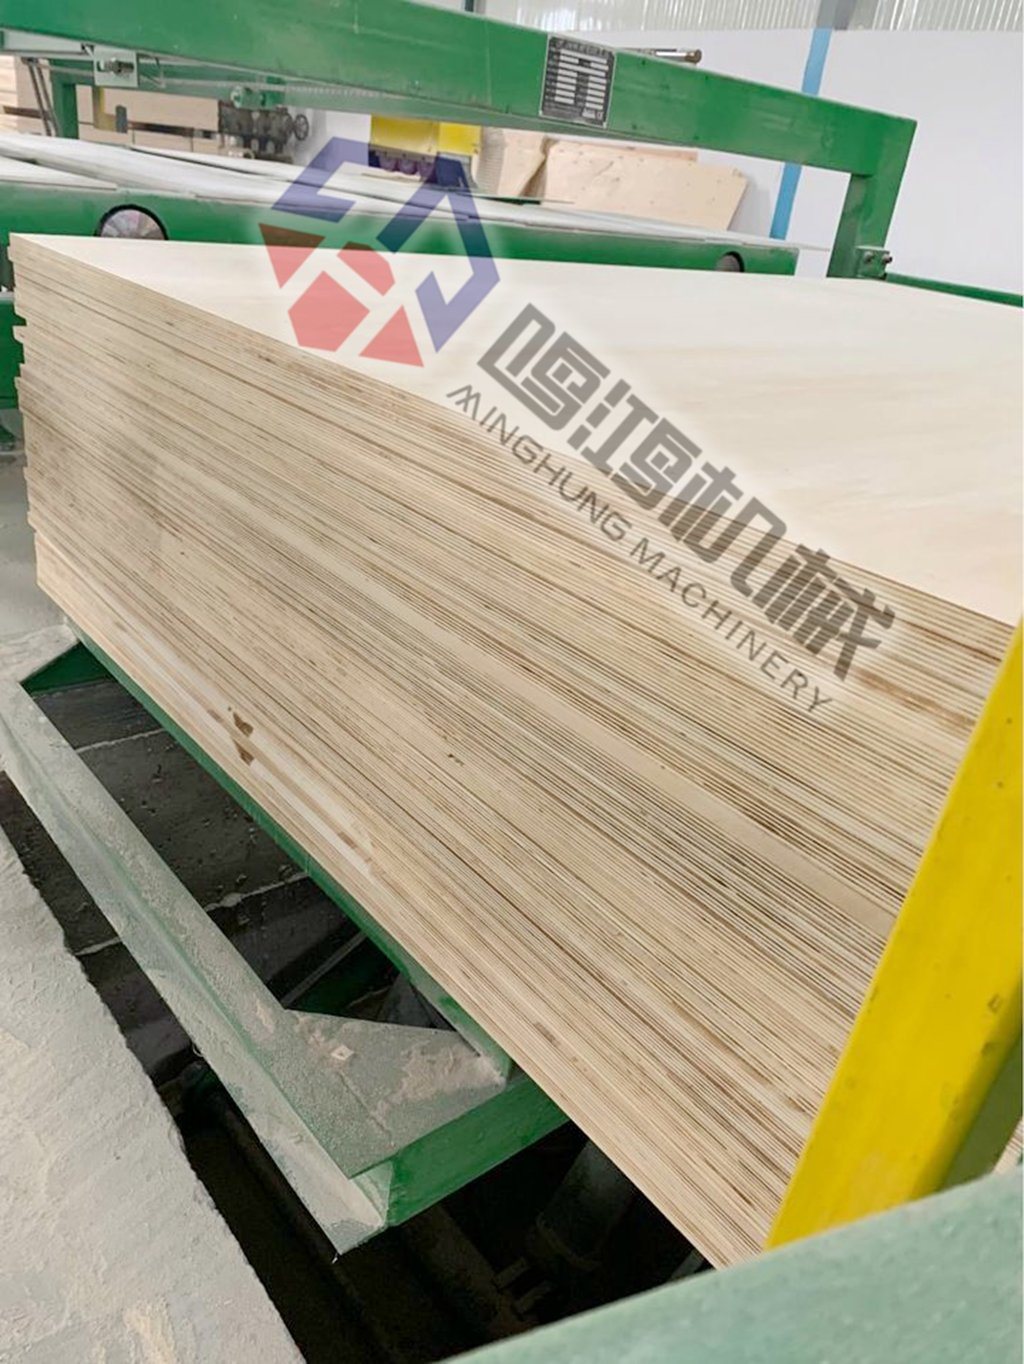 Double Sides Saw Machine for Cutting Plywood